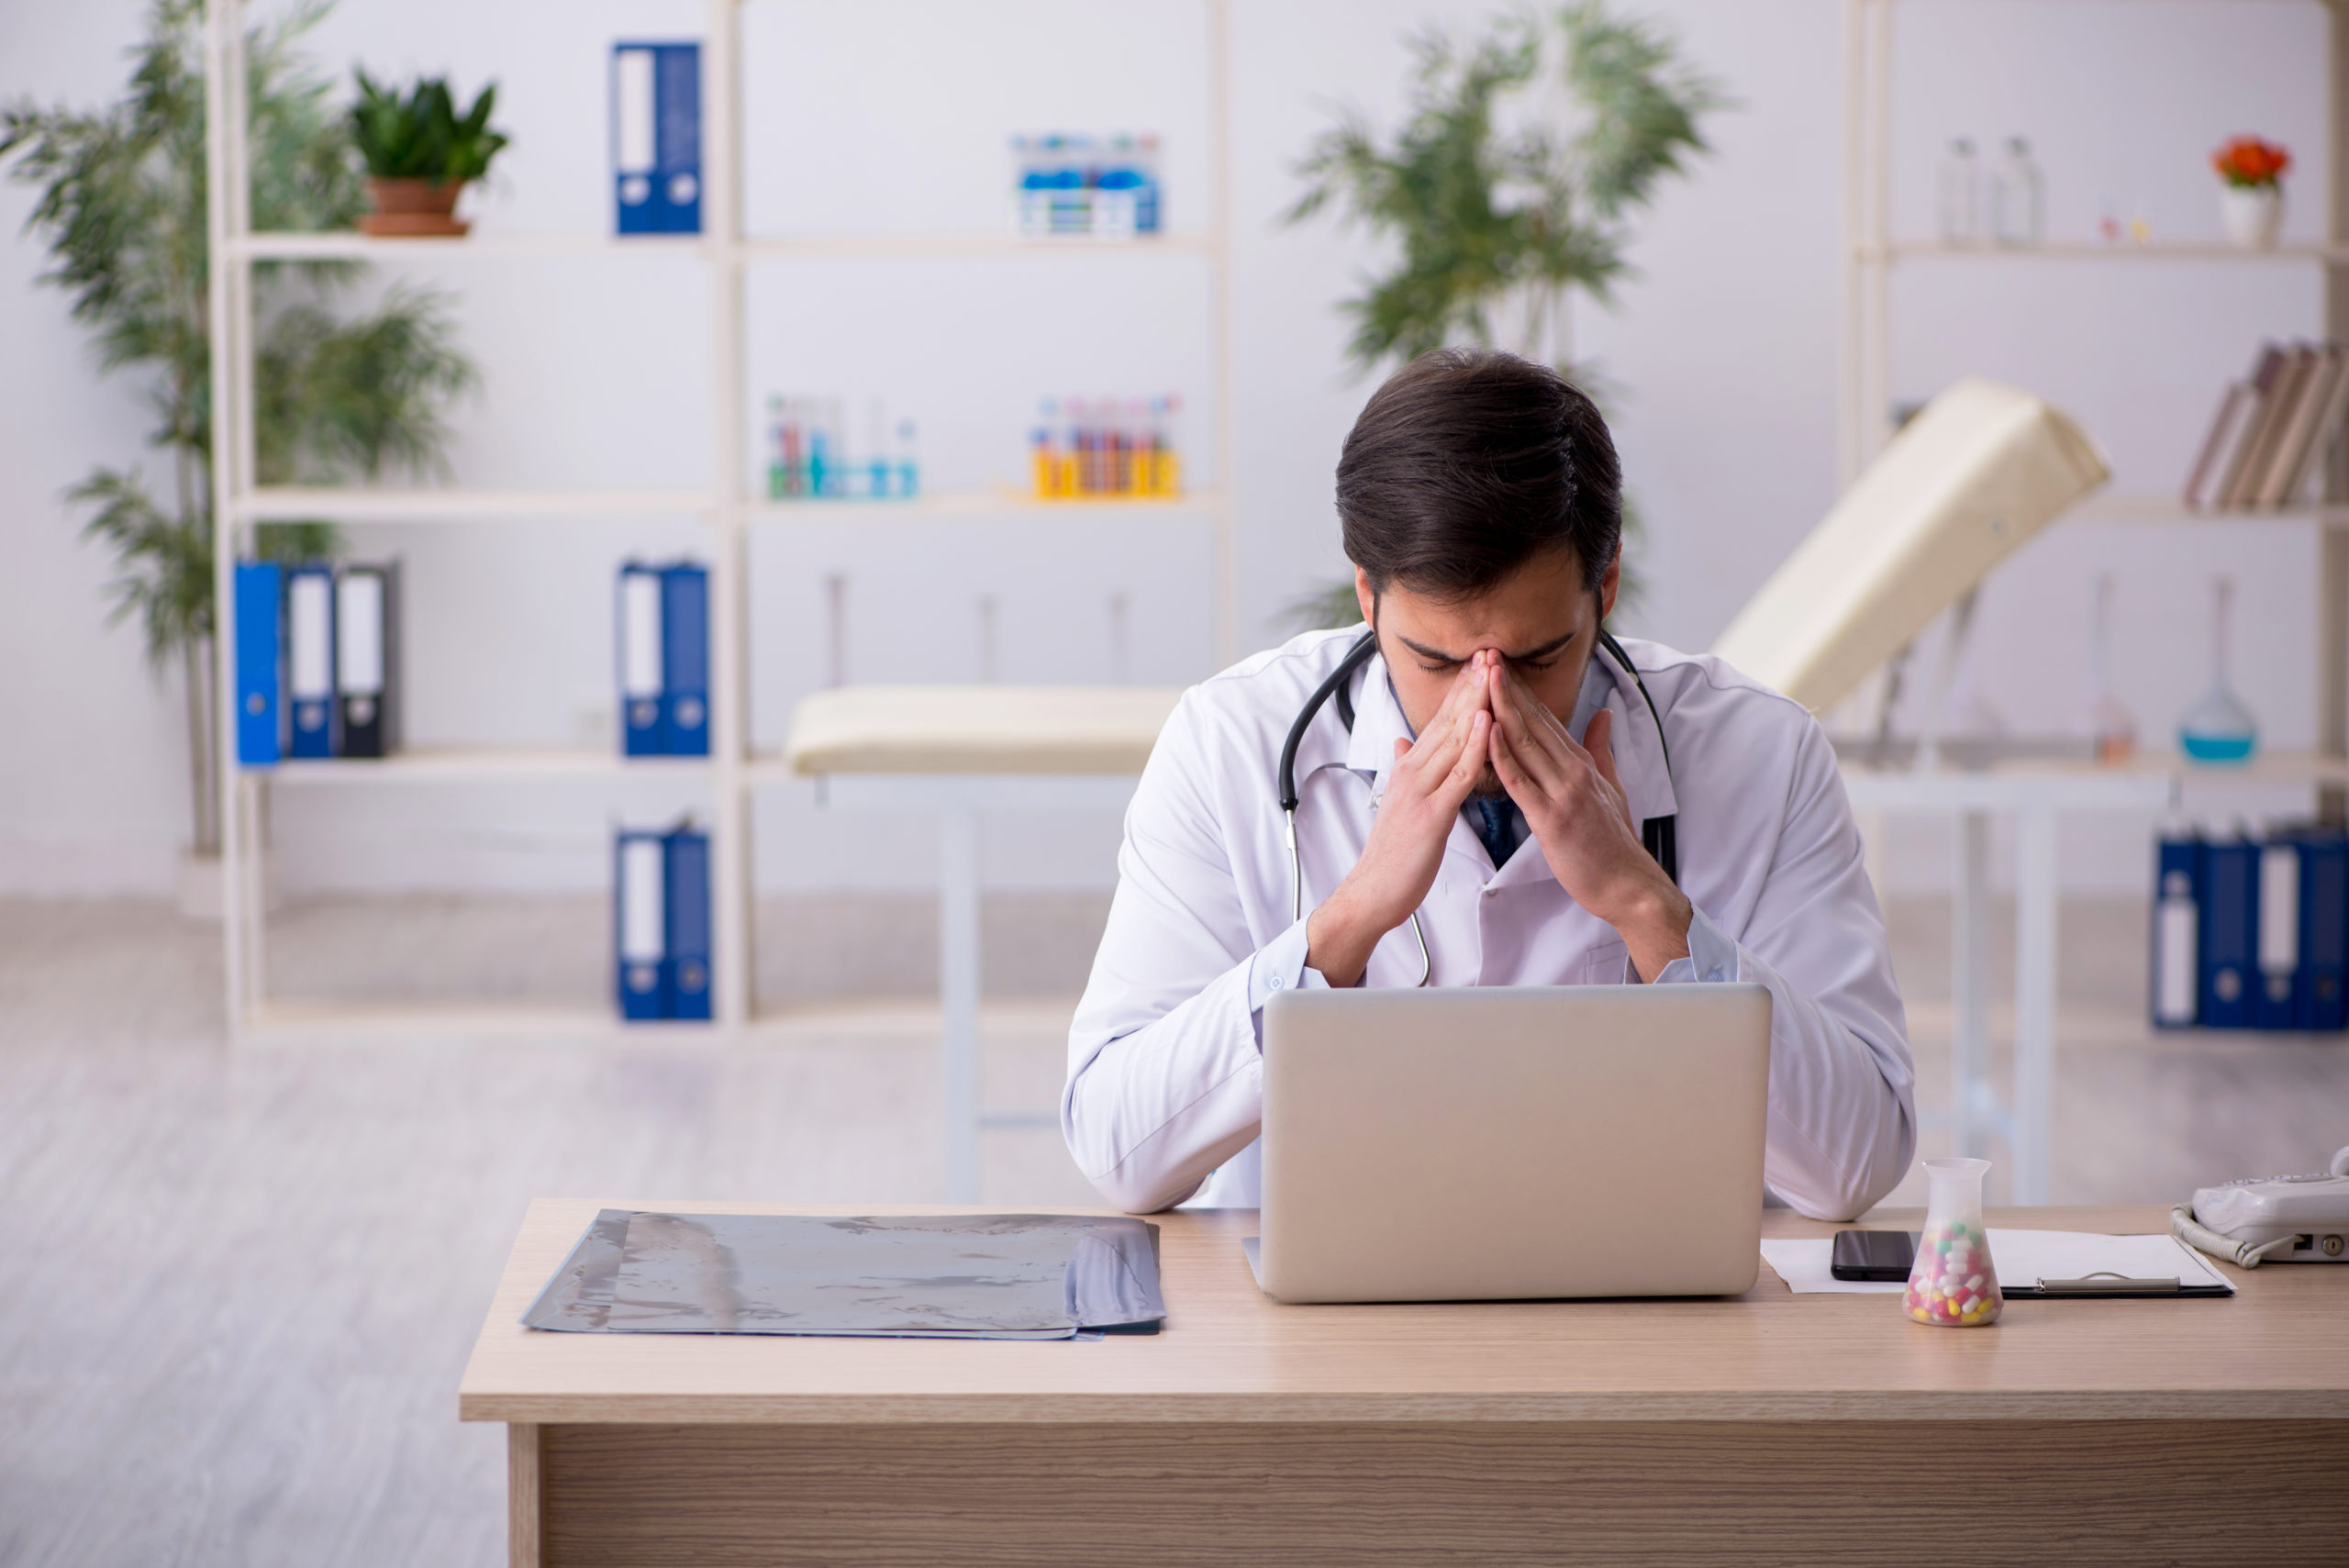 How To Reduce Medical Professional Exhaustion and Improve Patient Care